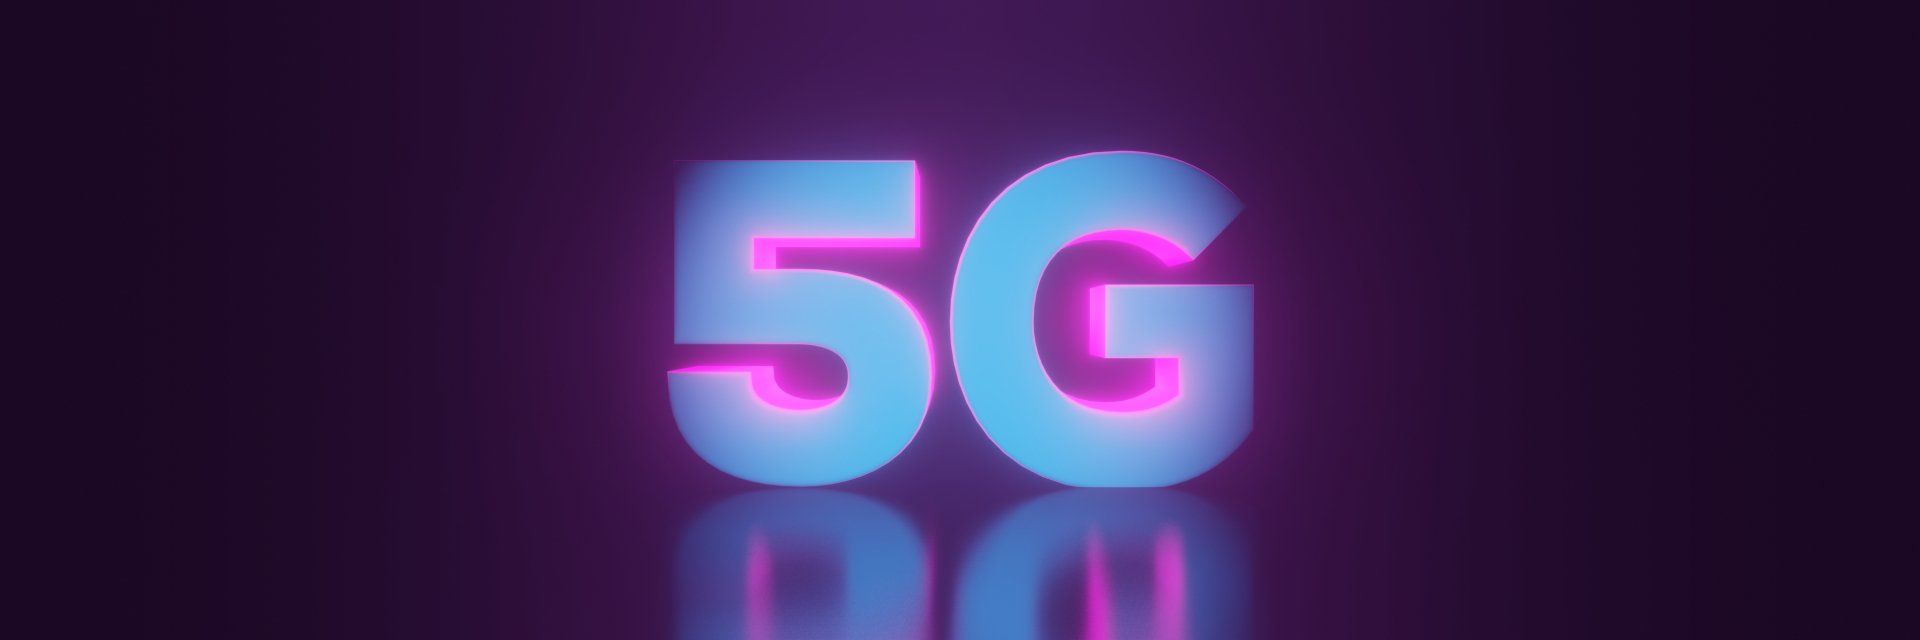 Banner showing 5G letters glowing neon